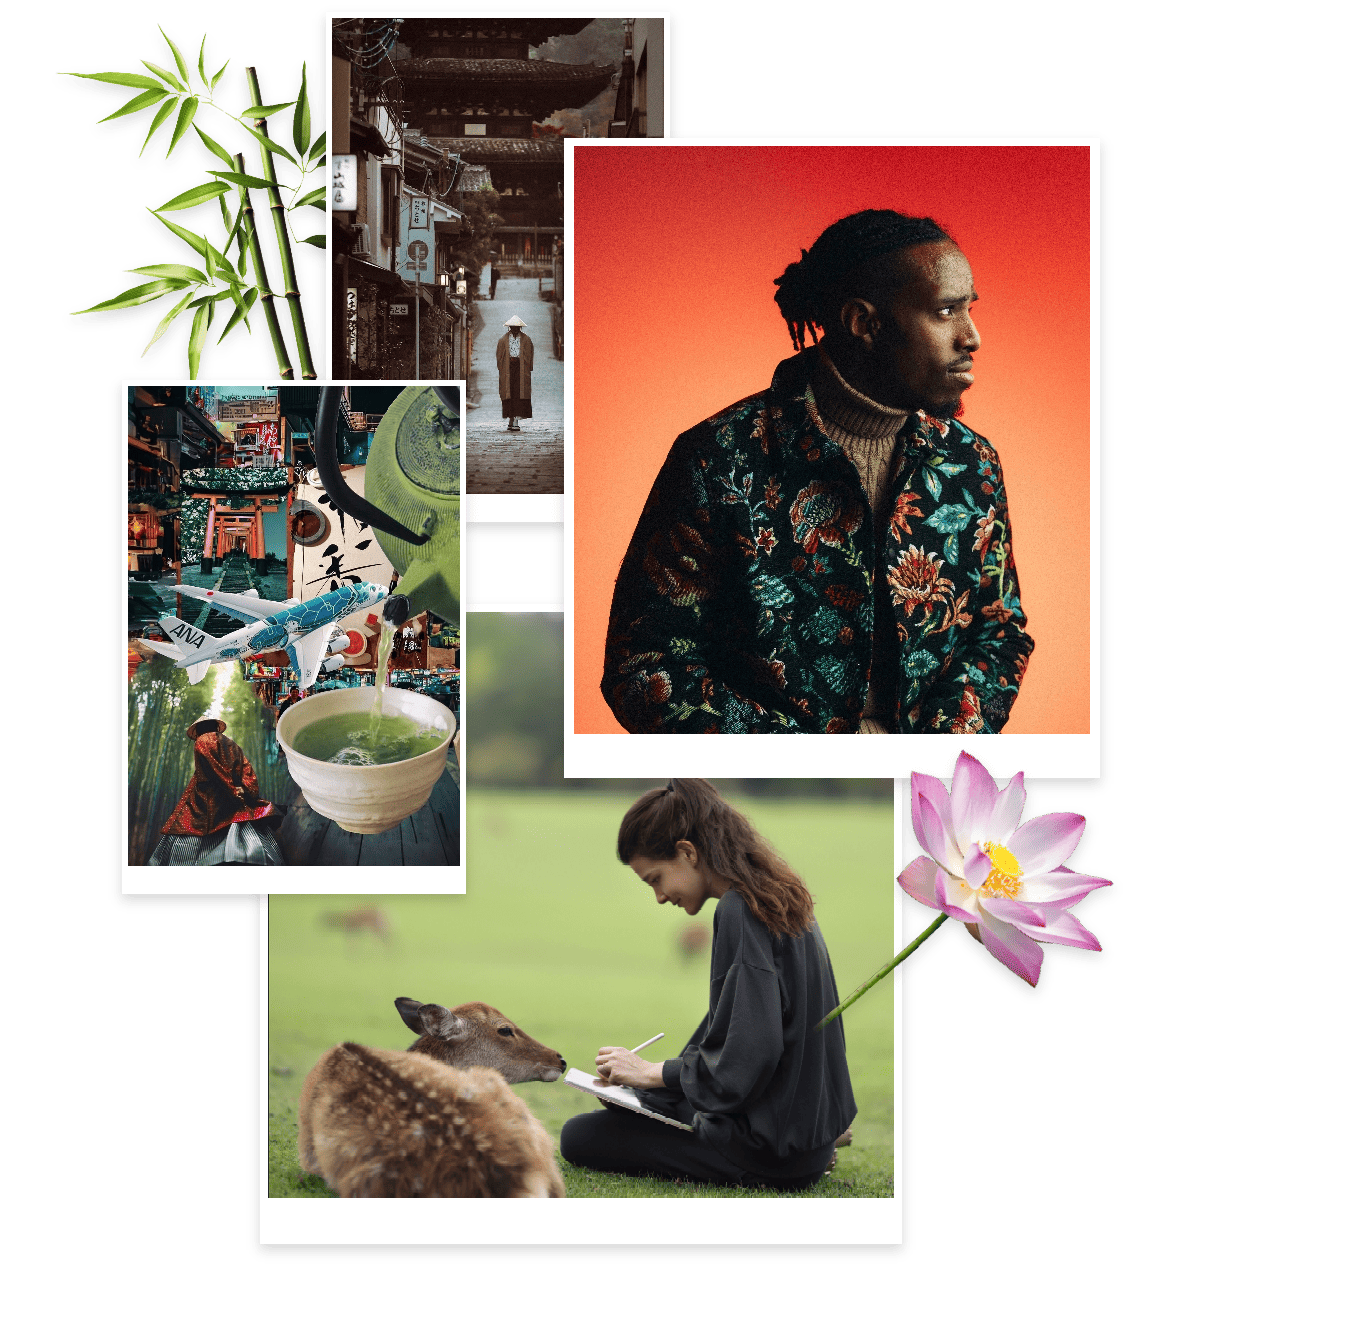 Collage featuring content creators Karl Shakur and empty.japan, matcha tea, a Japanese street with a man in a conical hat, bamboo shoots and flowers.